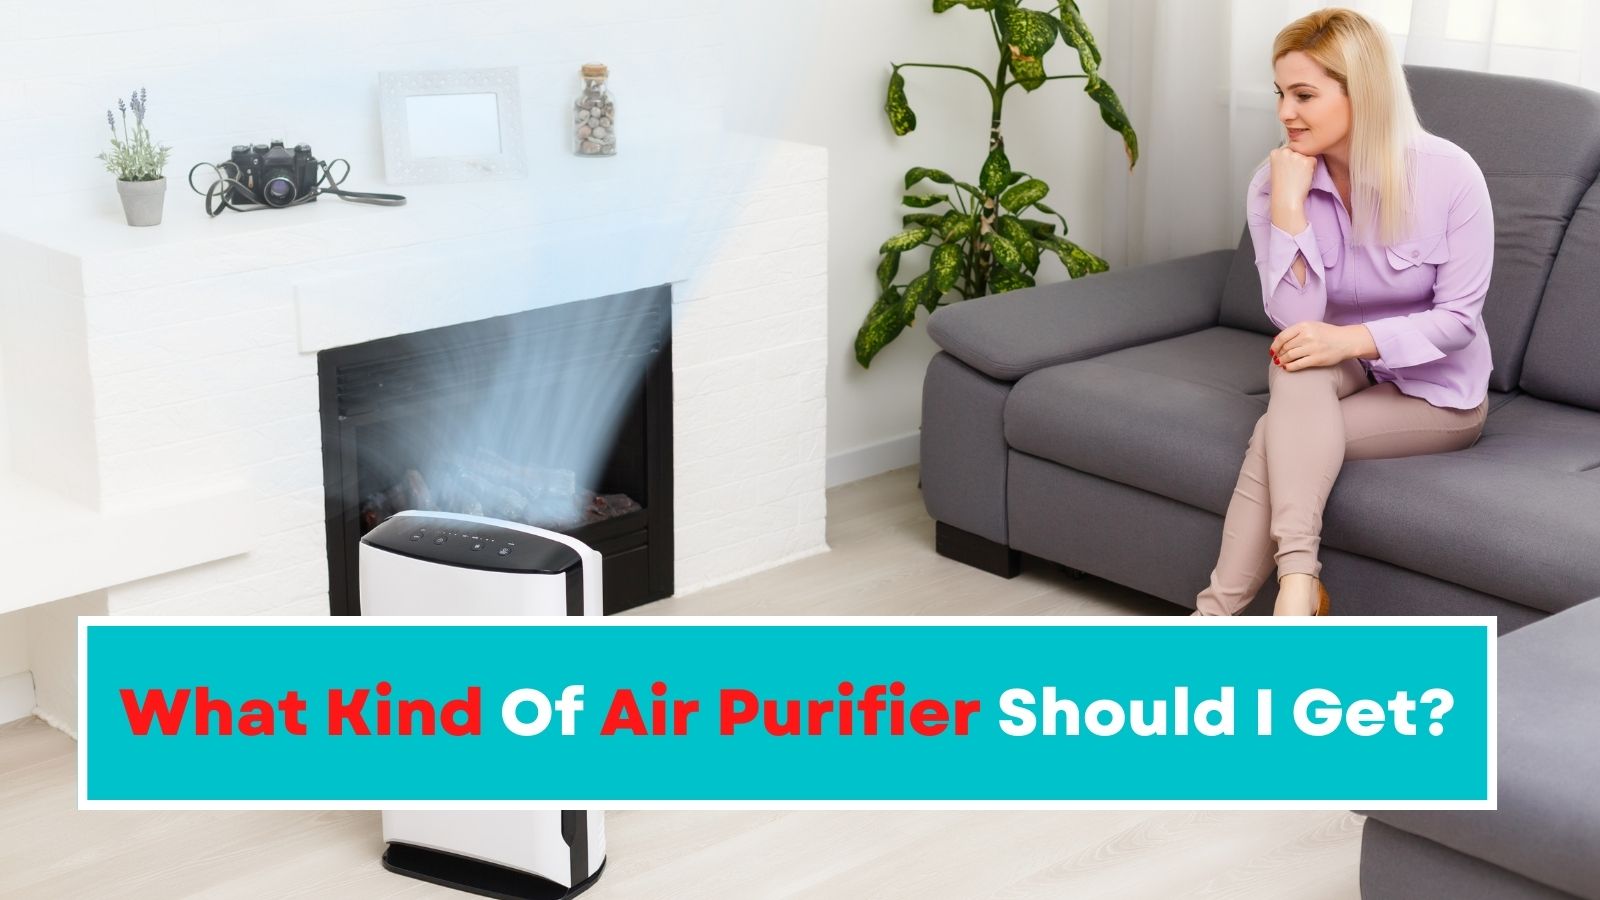 What Kind Of Air Purifier Should I Get?